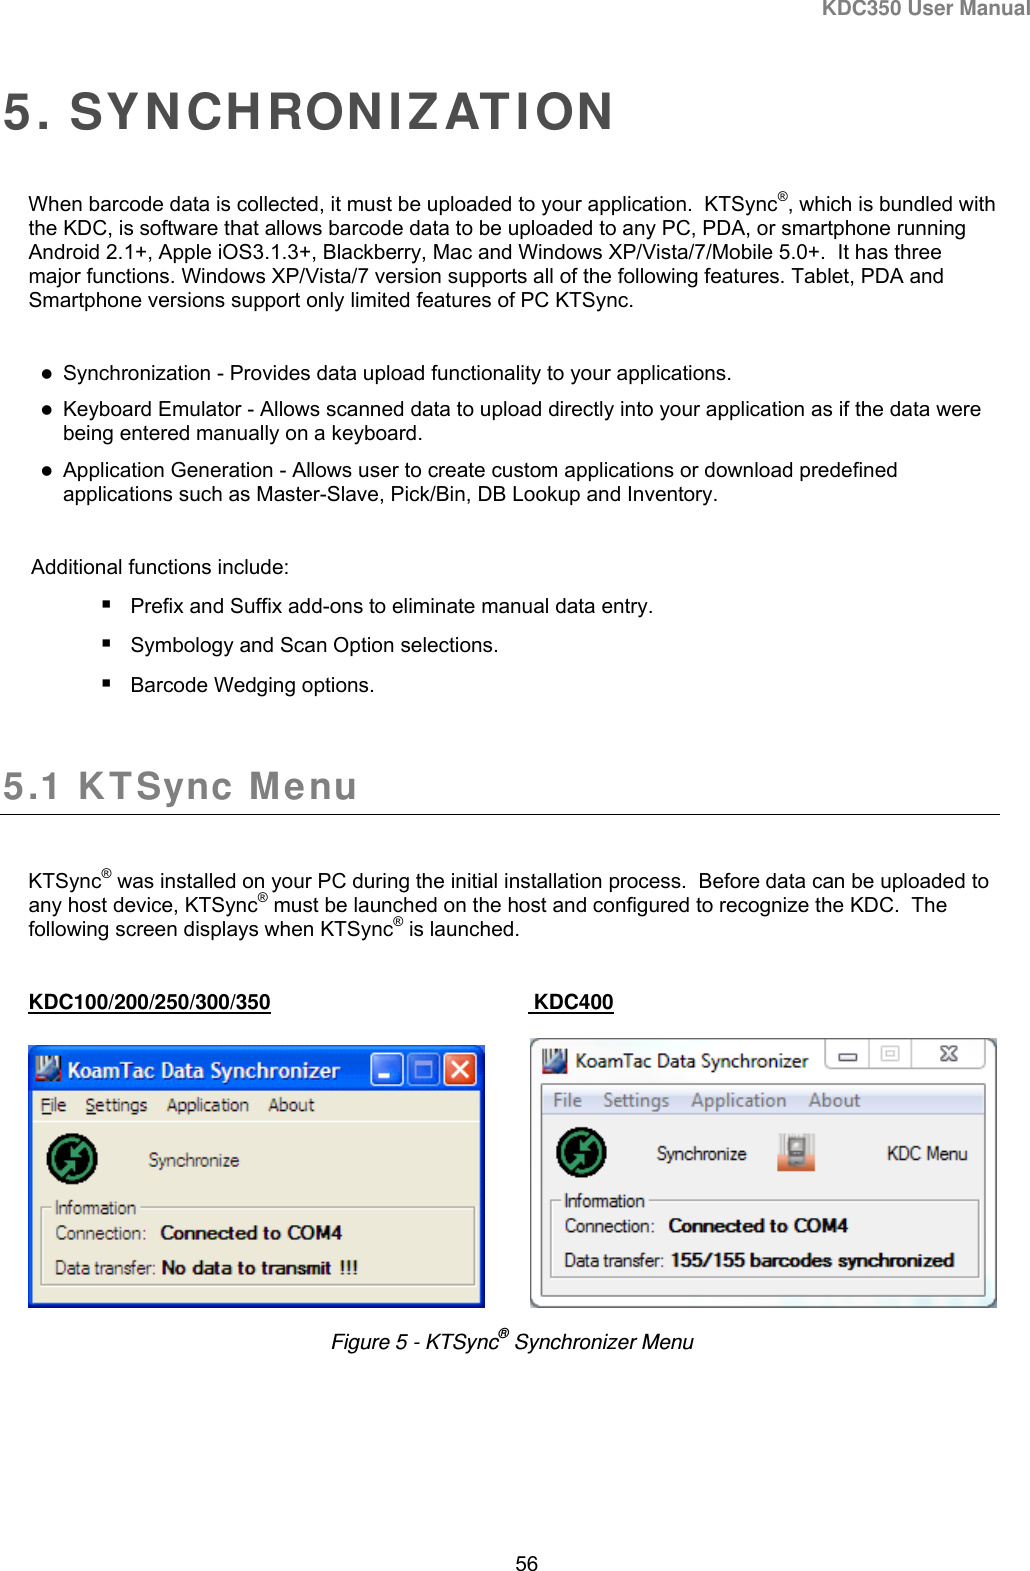 KDC350 User Manual  56  5. SYNCHRONIZATION When barcode data is collected, it must be uploaded to your application.  KTSync®, which is bundled with the KDC, is software that allows barcode data to be uploaded to any PC, PDA, or smartphone running Android 2.1+, Apple iOS3.1.3+, Blackberry, Mac and Windows XP/Vista/7/Mobile 5.0+.  It has three major functions. Windows XP/Vista/7 version supports all of the following features. Tablet, PDA and Smartphone versions support only limited features of PC KTSync.   Synchronization - Provides data upload functionality to your applications.  Keyboard Emulator - Allows scanned data to upload directly into your application as if the data were being entered manually on a keyboard.  Application Generation - Allows user to create custom applications or download predefined applications such as Master-Slave, Pick/Bin, DB Lookup and Inventory.  Additional functions include:  Prefix and Suffix add-ons to eliminate manual data entry.  Symbology and Scan Option selections.  Barcode Wedging options.  5.1 KTSync Menu   KTSync® was installed on your PC during the initial installation process.  Before data can be uploaded to any host device, KTSync® must be launched on the host and configured to recognize the KDC.  The following screen displays when KTSync® is launched.   KDC100/200/250/300/350     KDC400                Figure 5 - KTSync® Synchronizer Menu